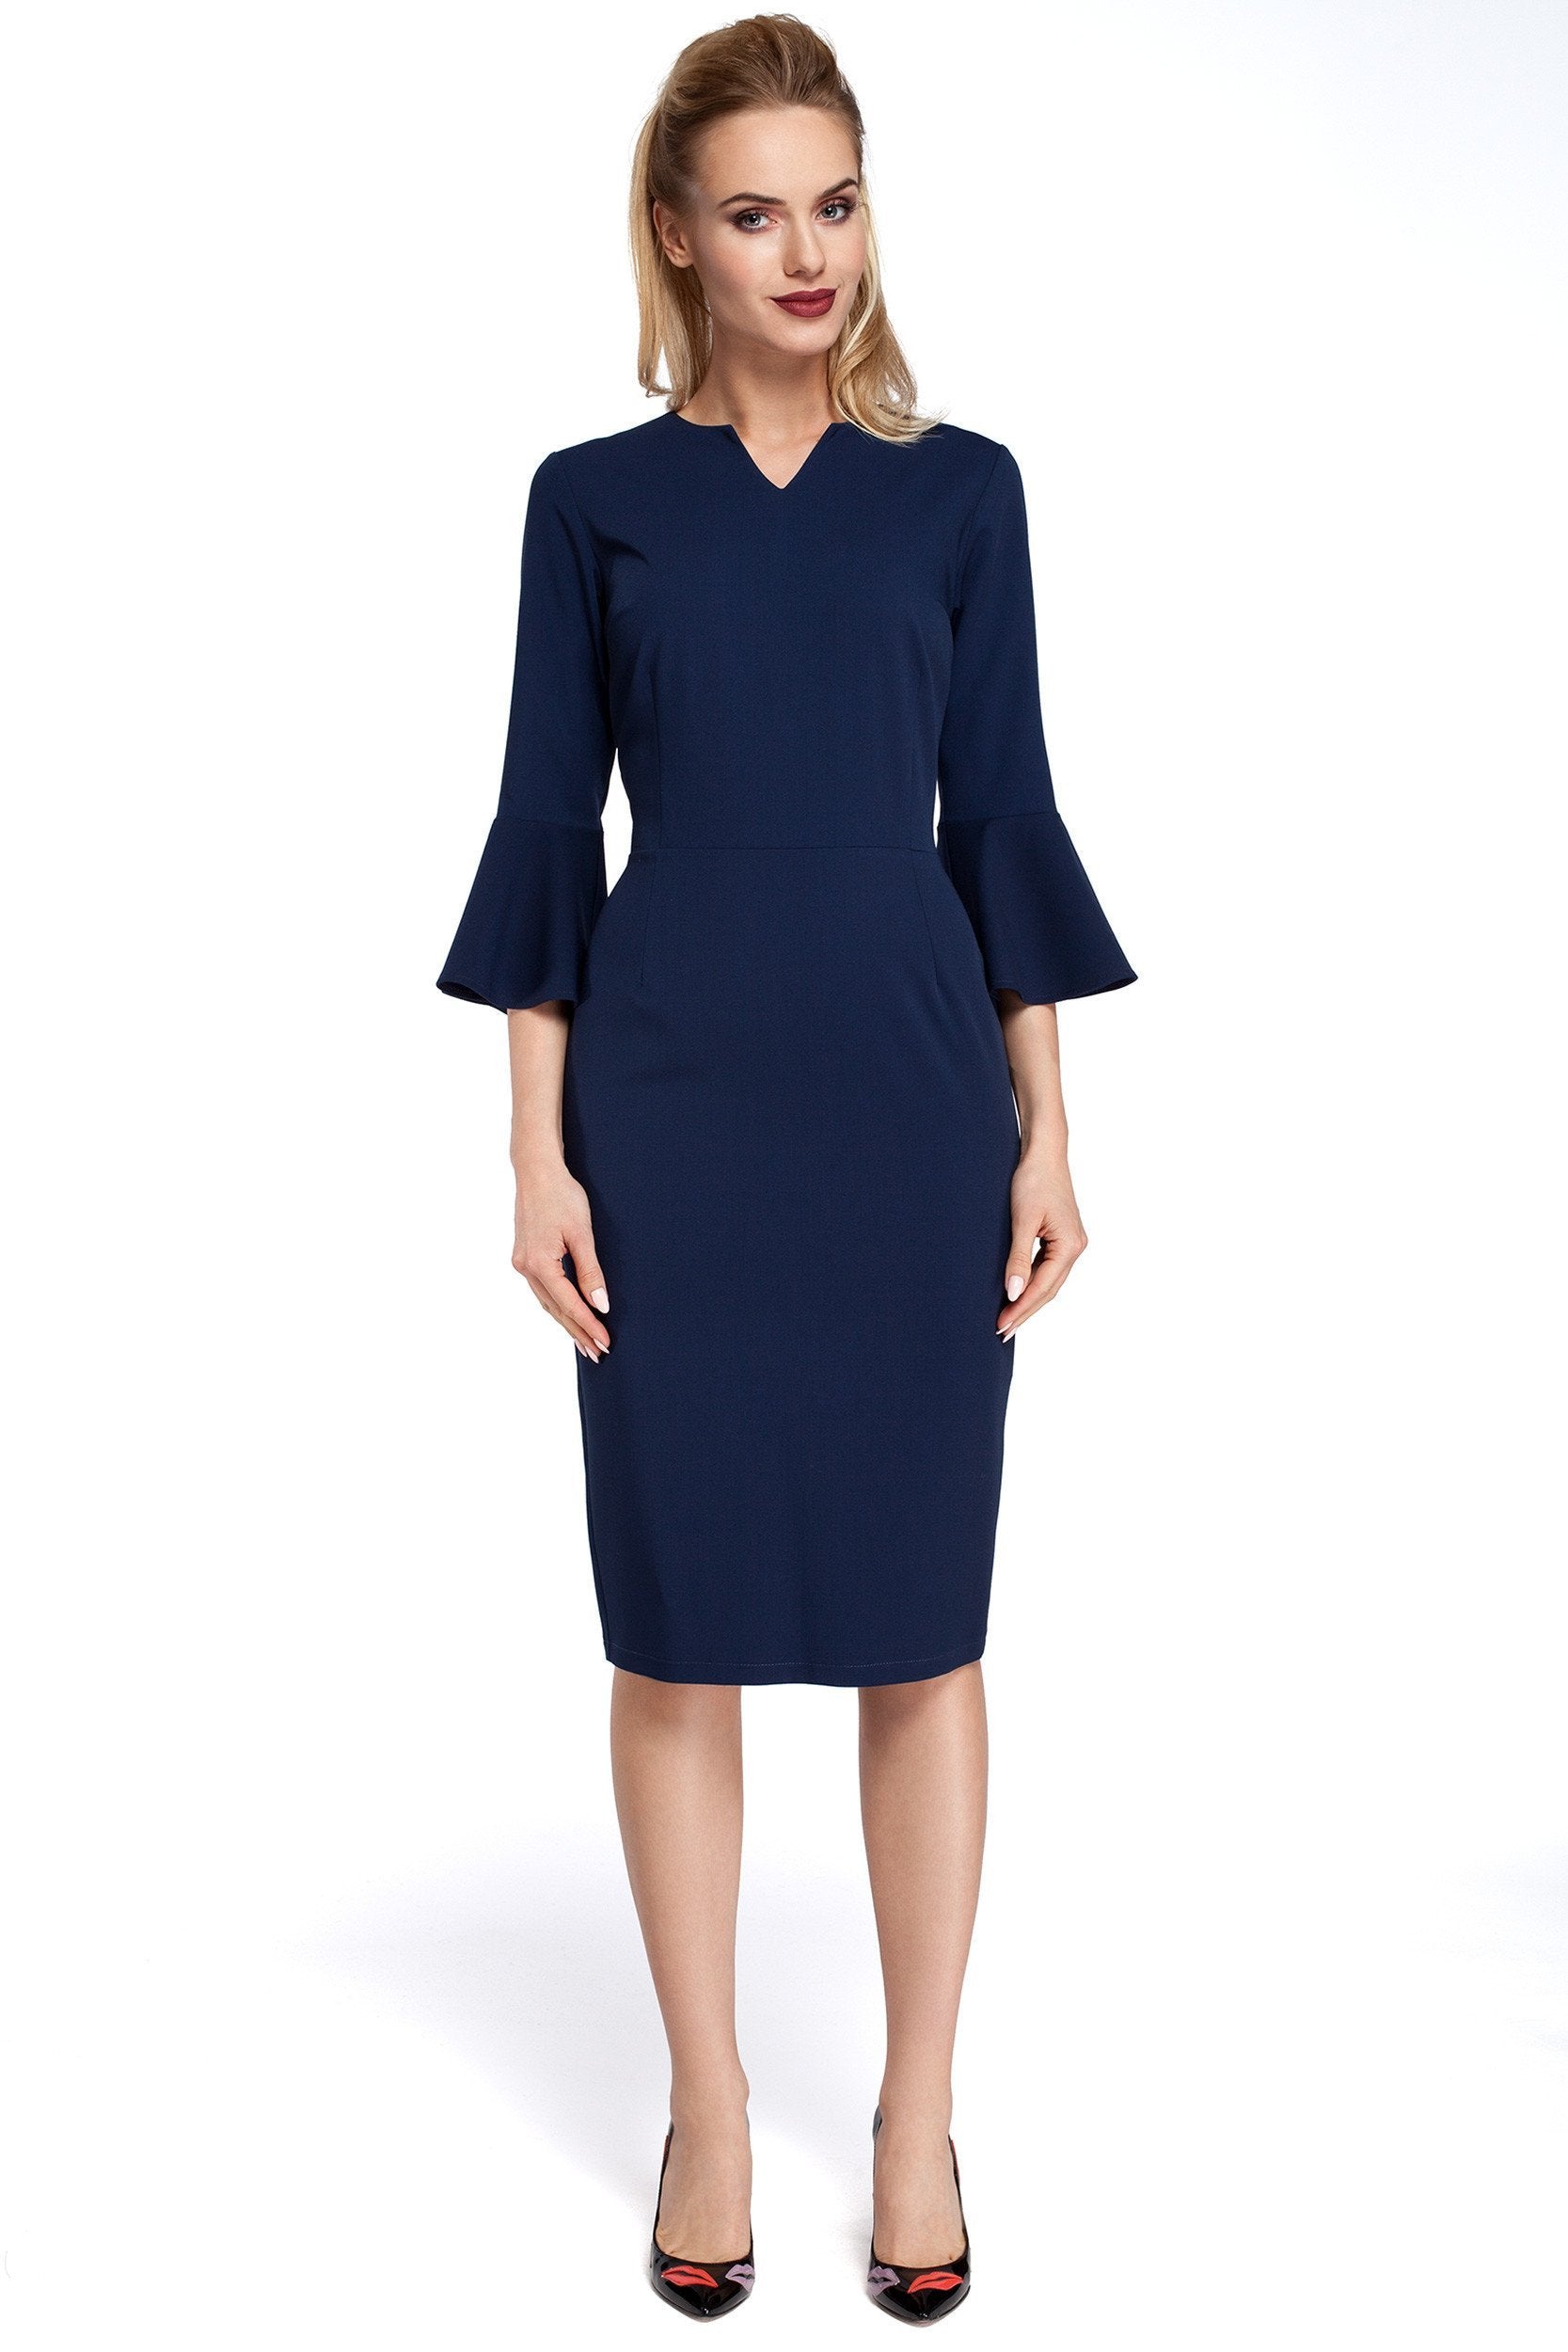 Navy Blue Pencil Dress With Bell ...